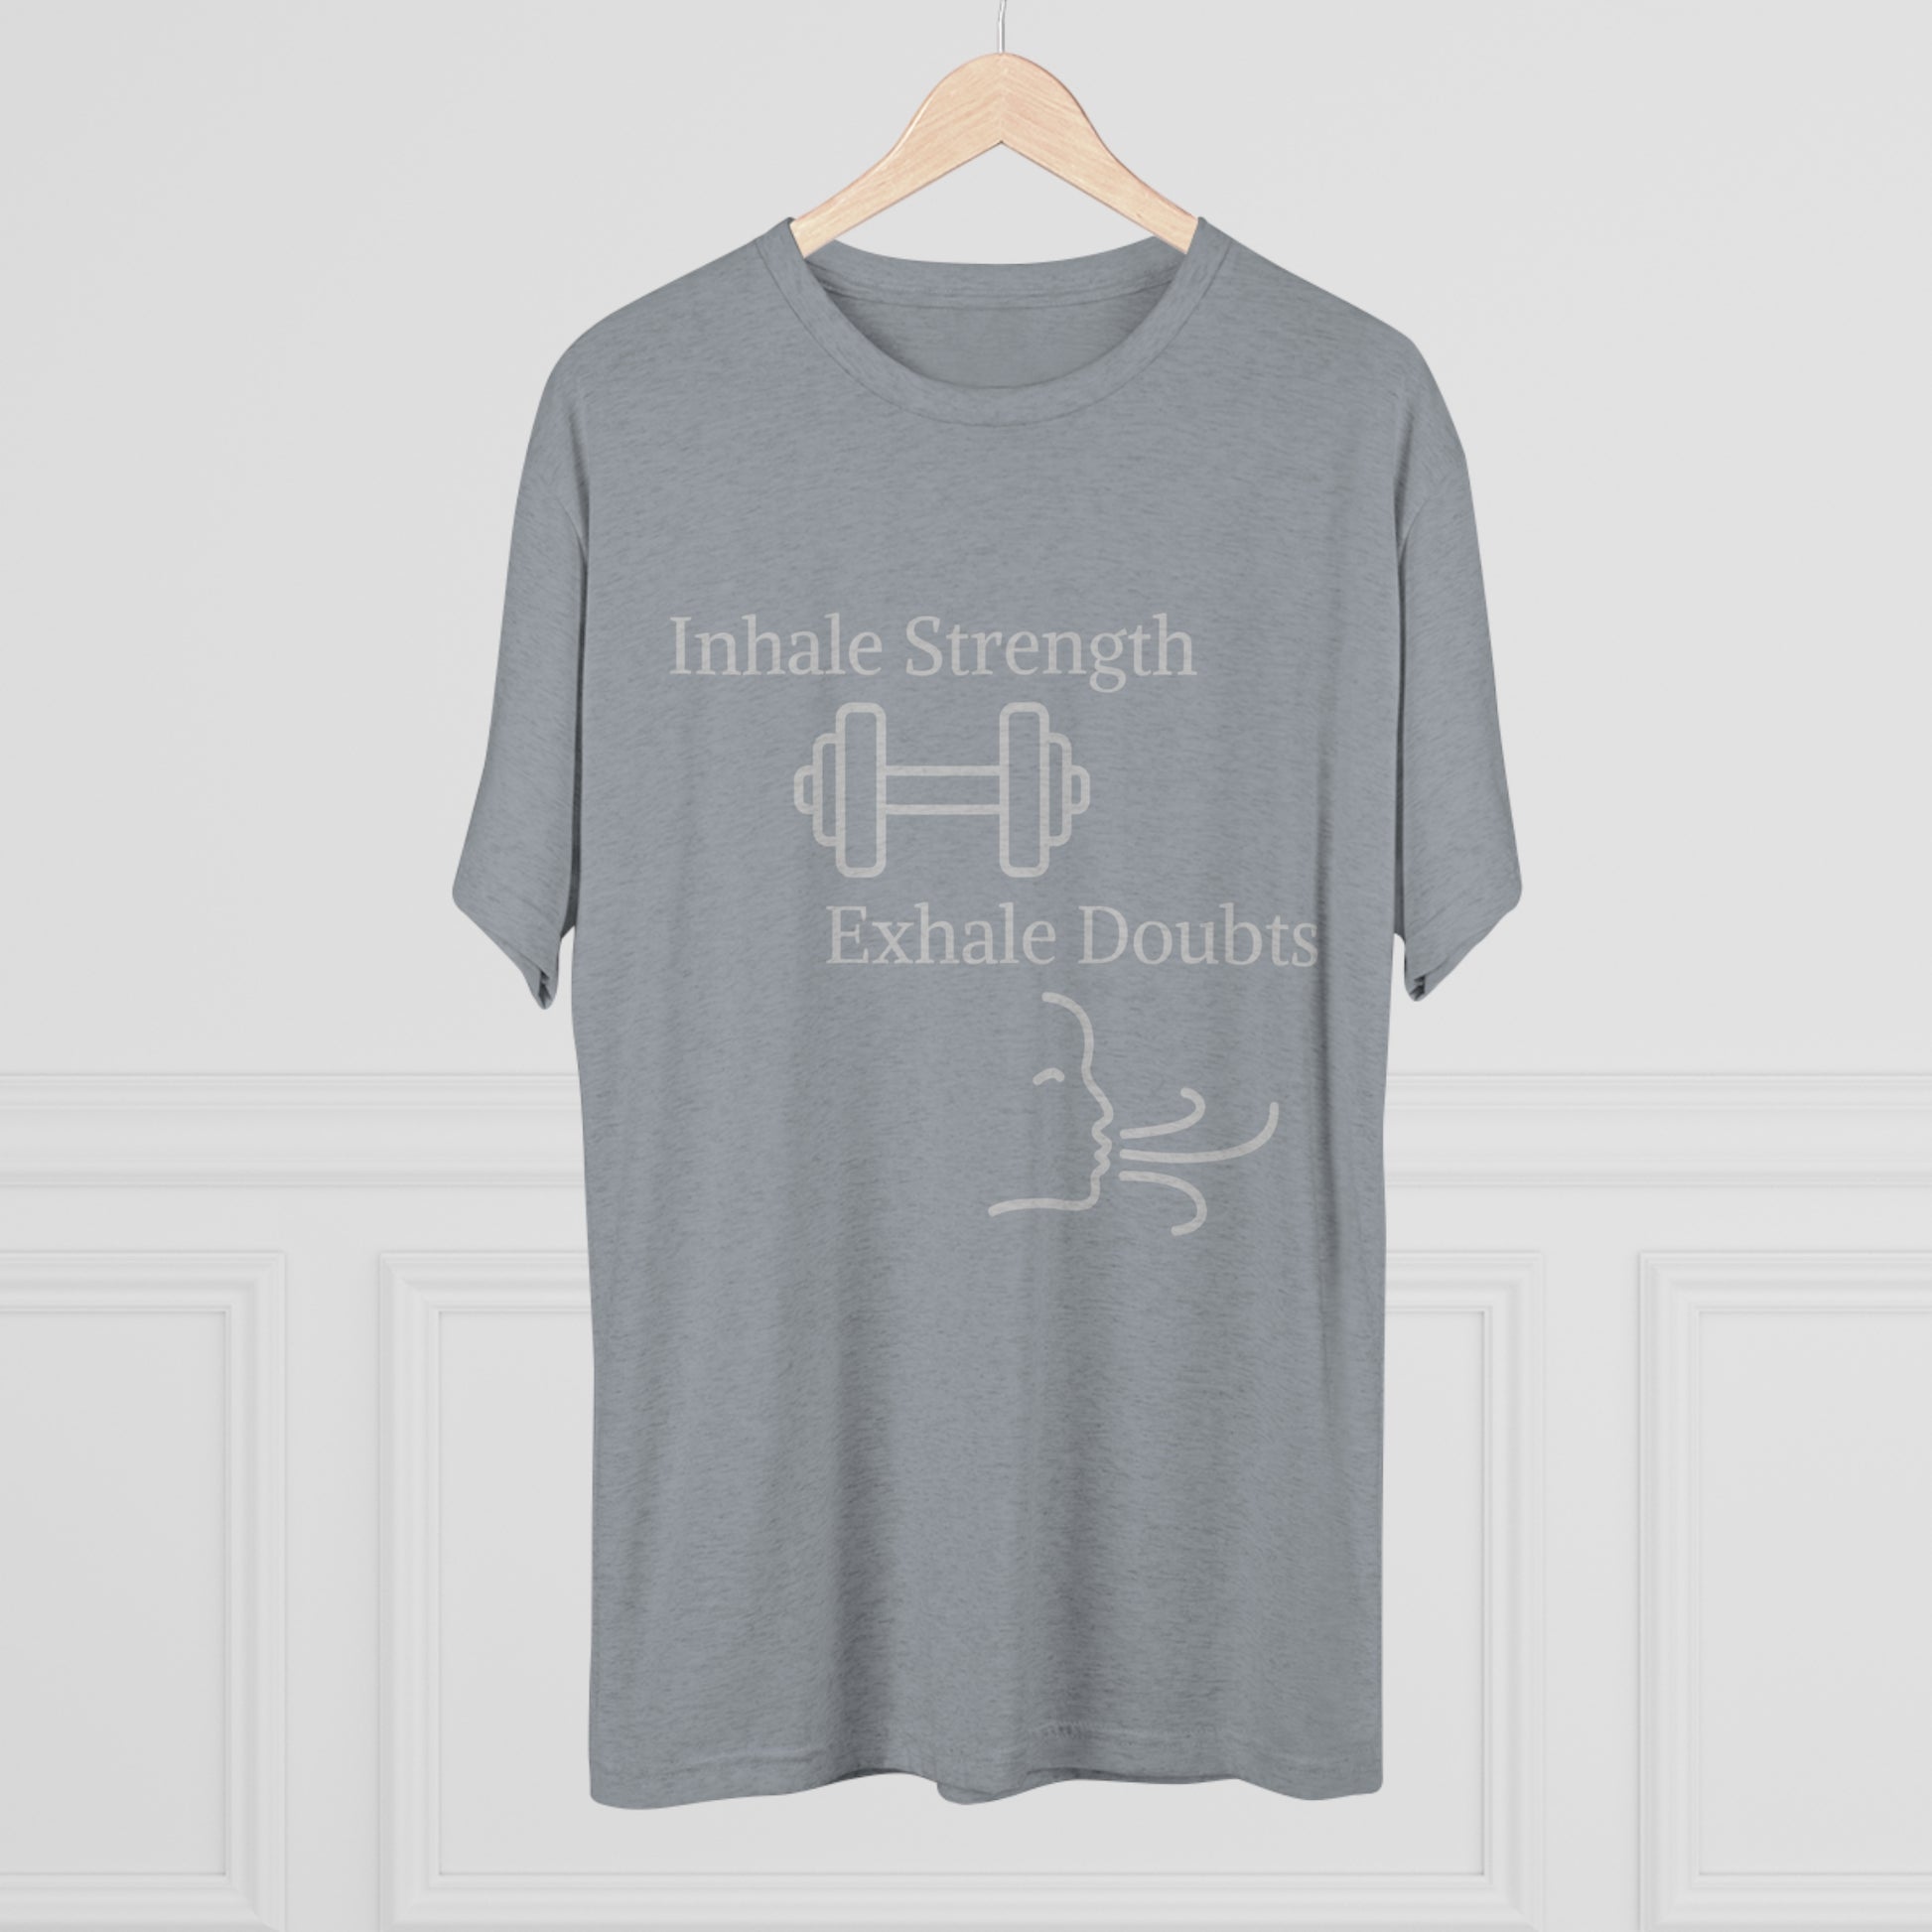 Printify's Inhale Strength Exhale Doubt w Images - Unisex Tri-Blend Crew Tee on a hanger features the text "inhale strength exhale doubts" with a dumbbell icon and a stylized exhaling face, against a neutral background.